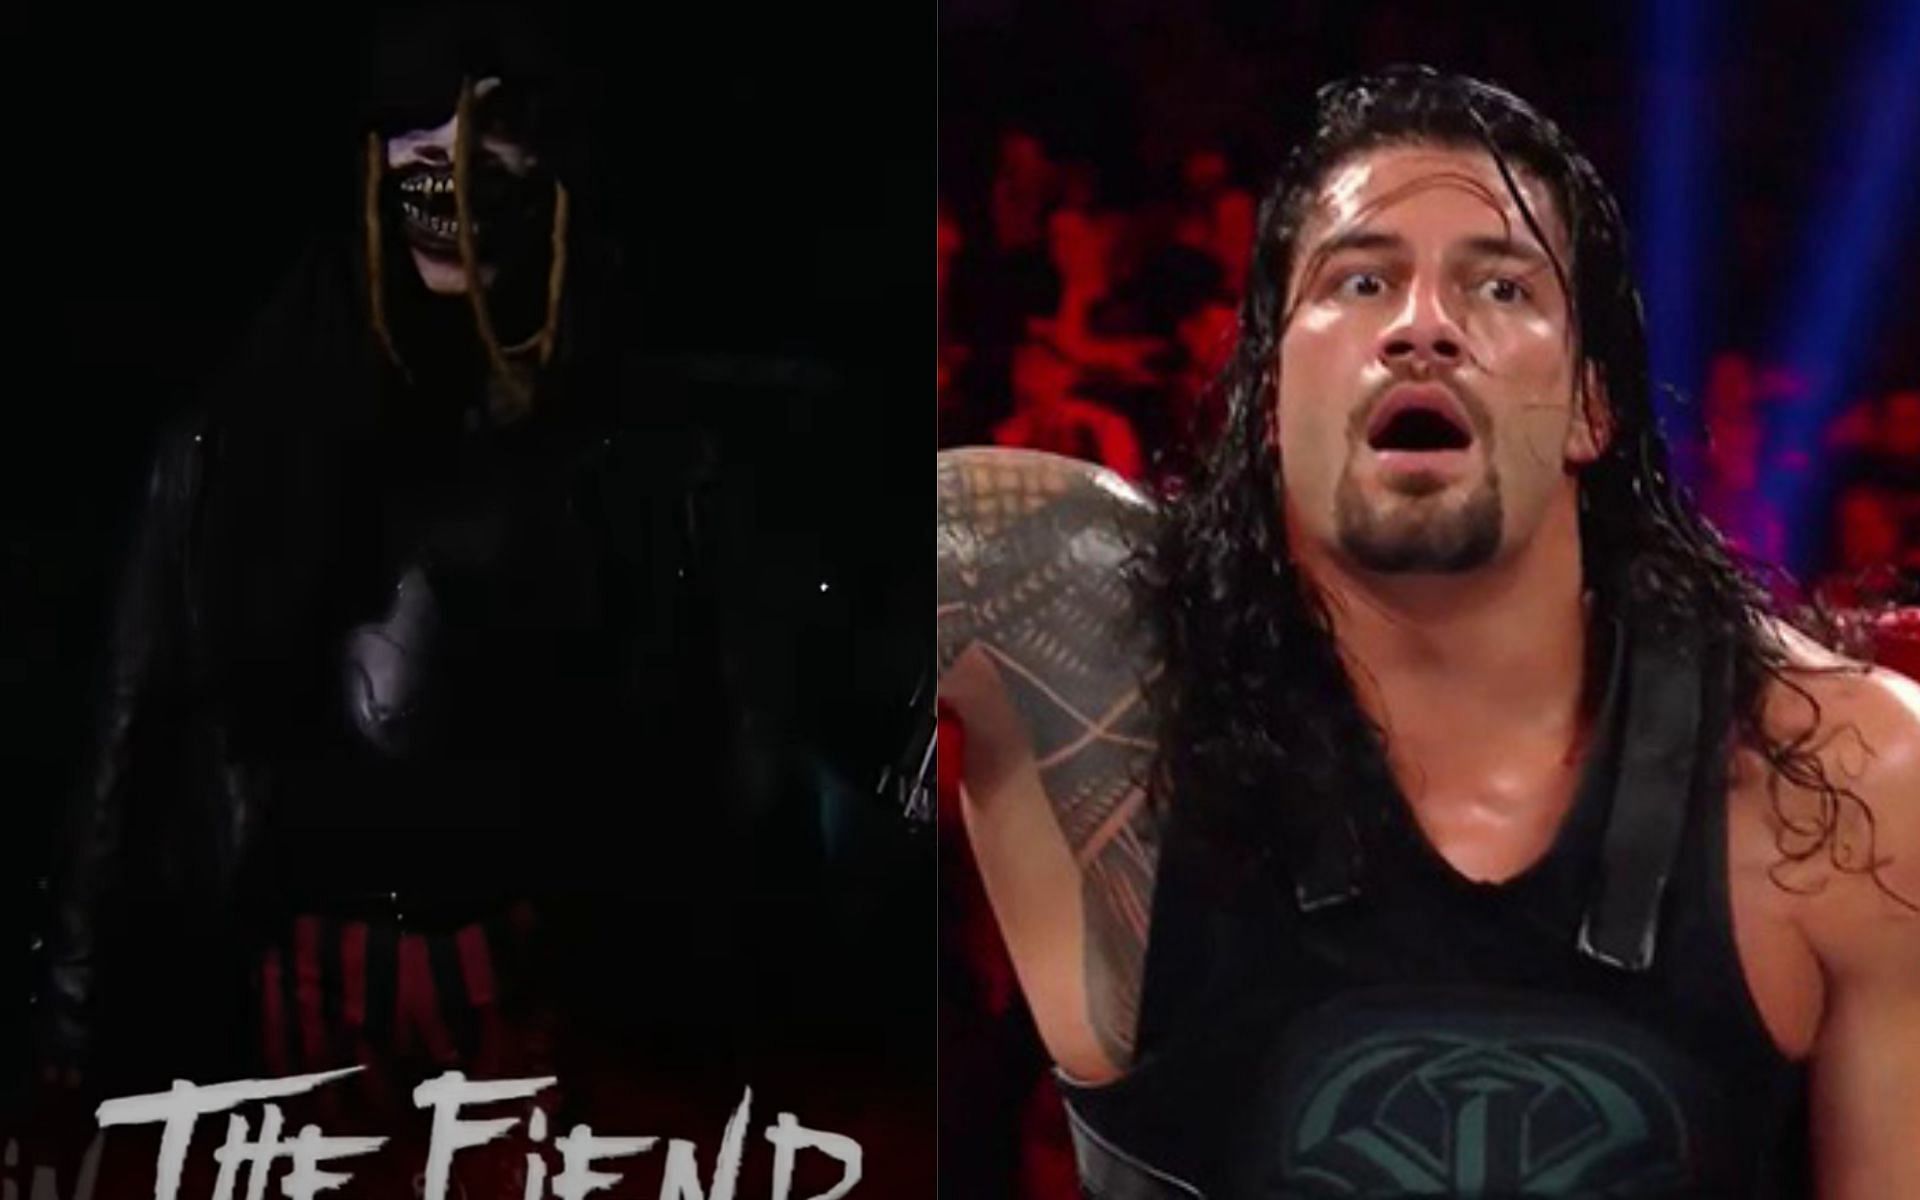 Roman Reigns could face off against some exciting opponents